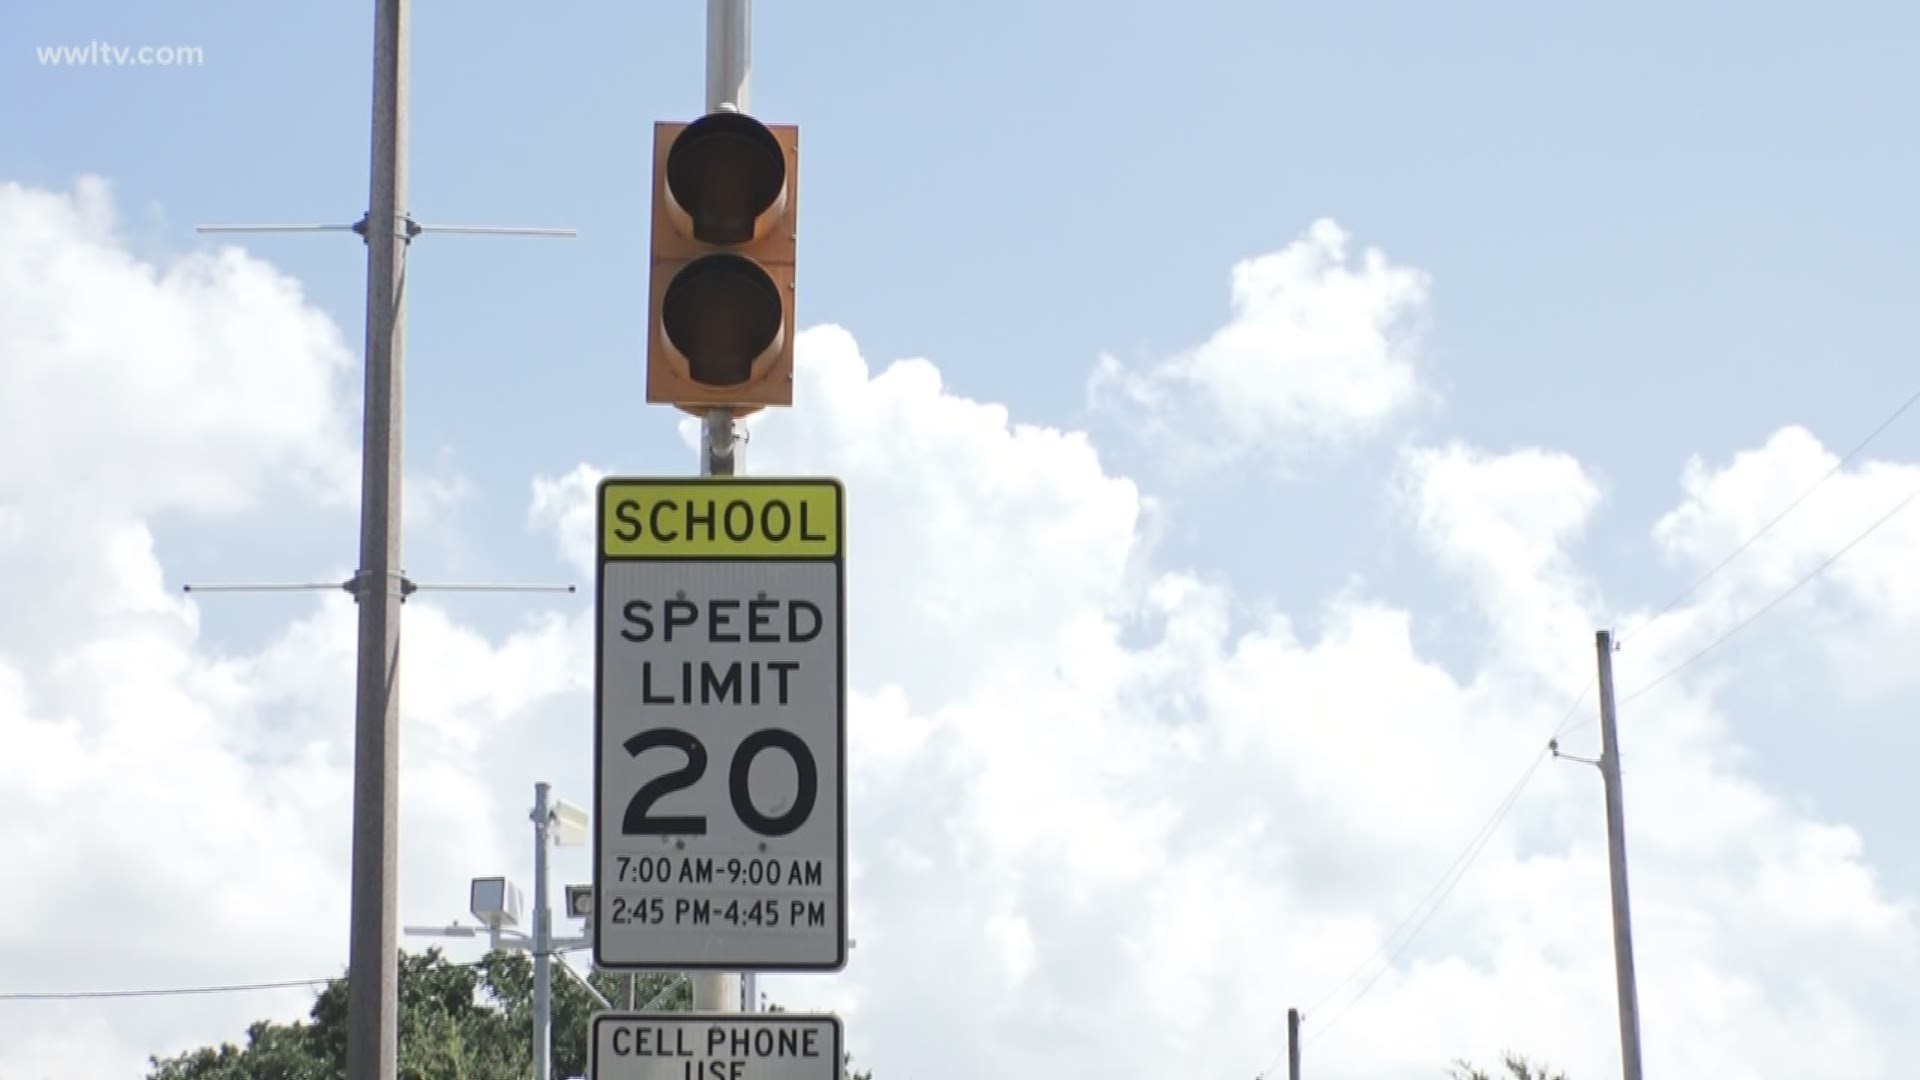 Some school zone traffic cameras in New Orleans were set to the wrong time zone, letting them fine drivers who were not speeding in a school zone.